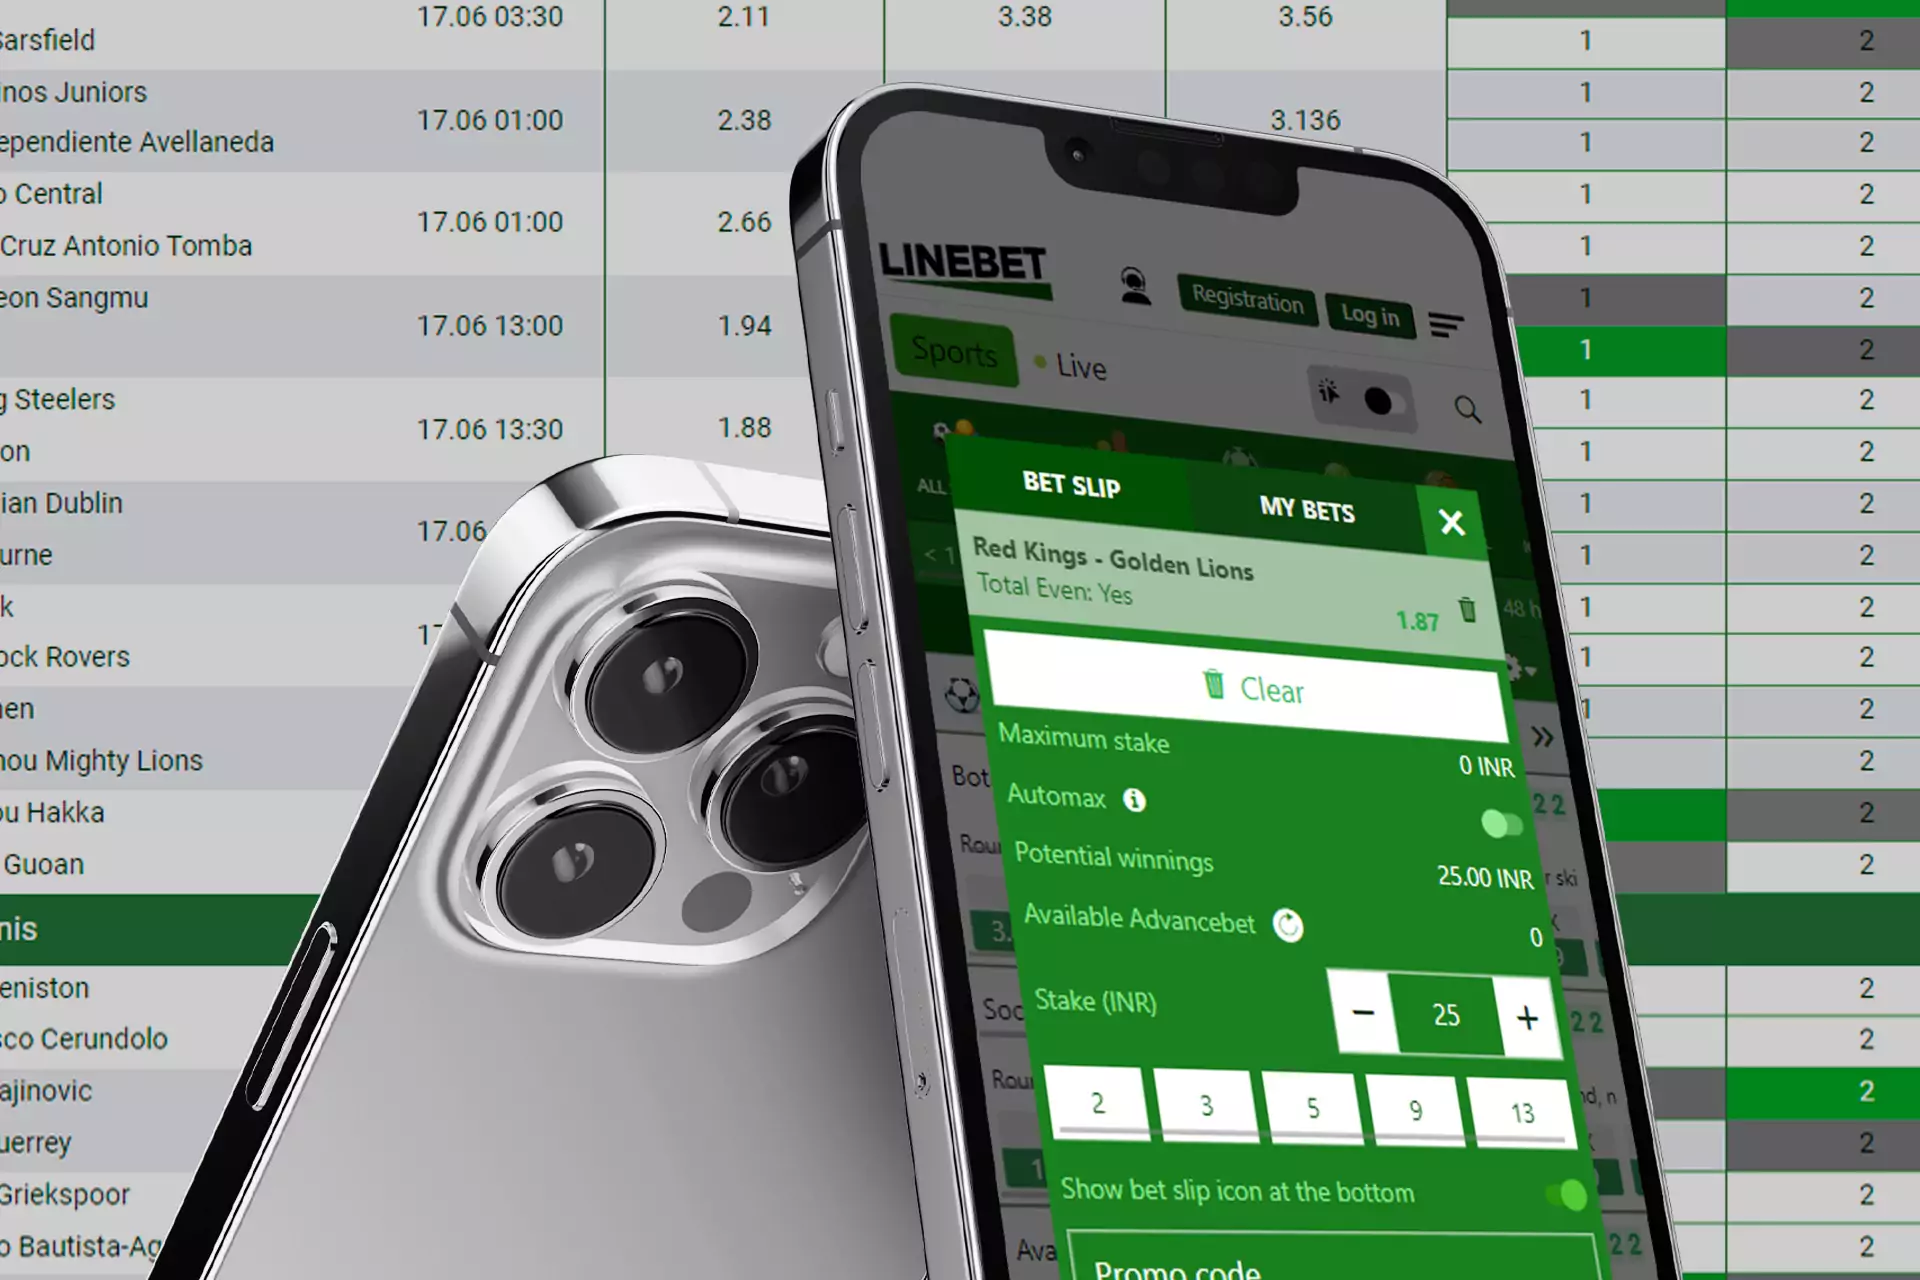 The constructor helps to choose the betting options.